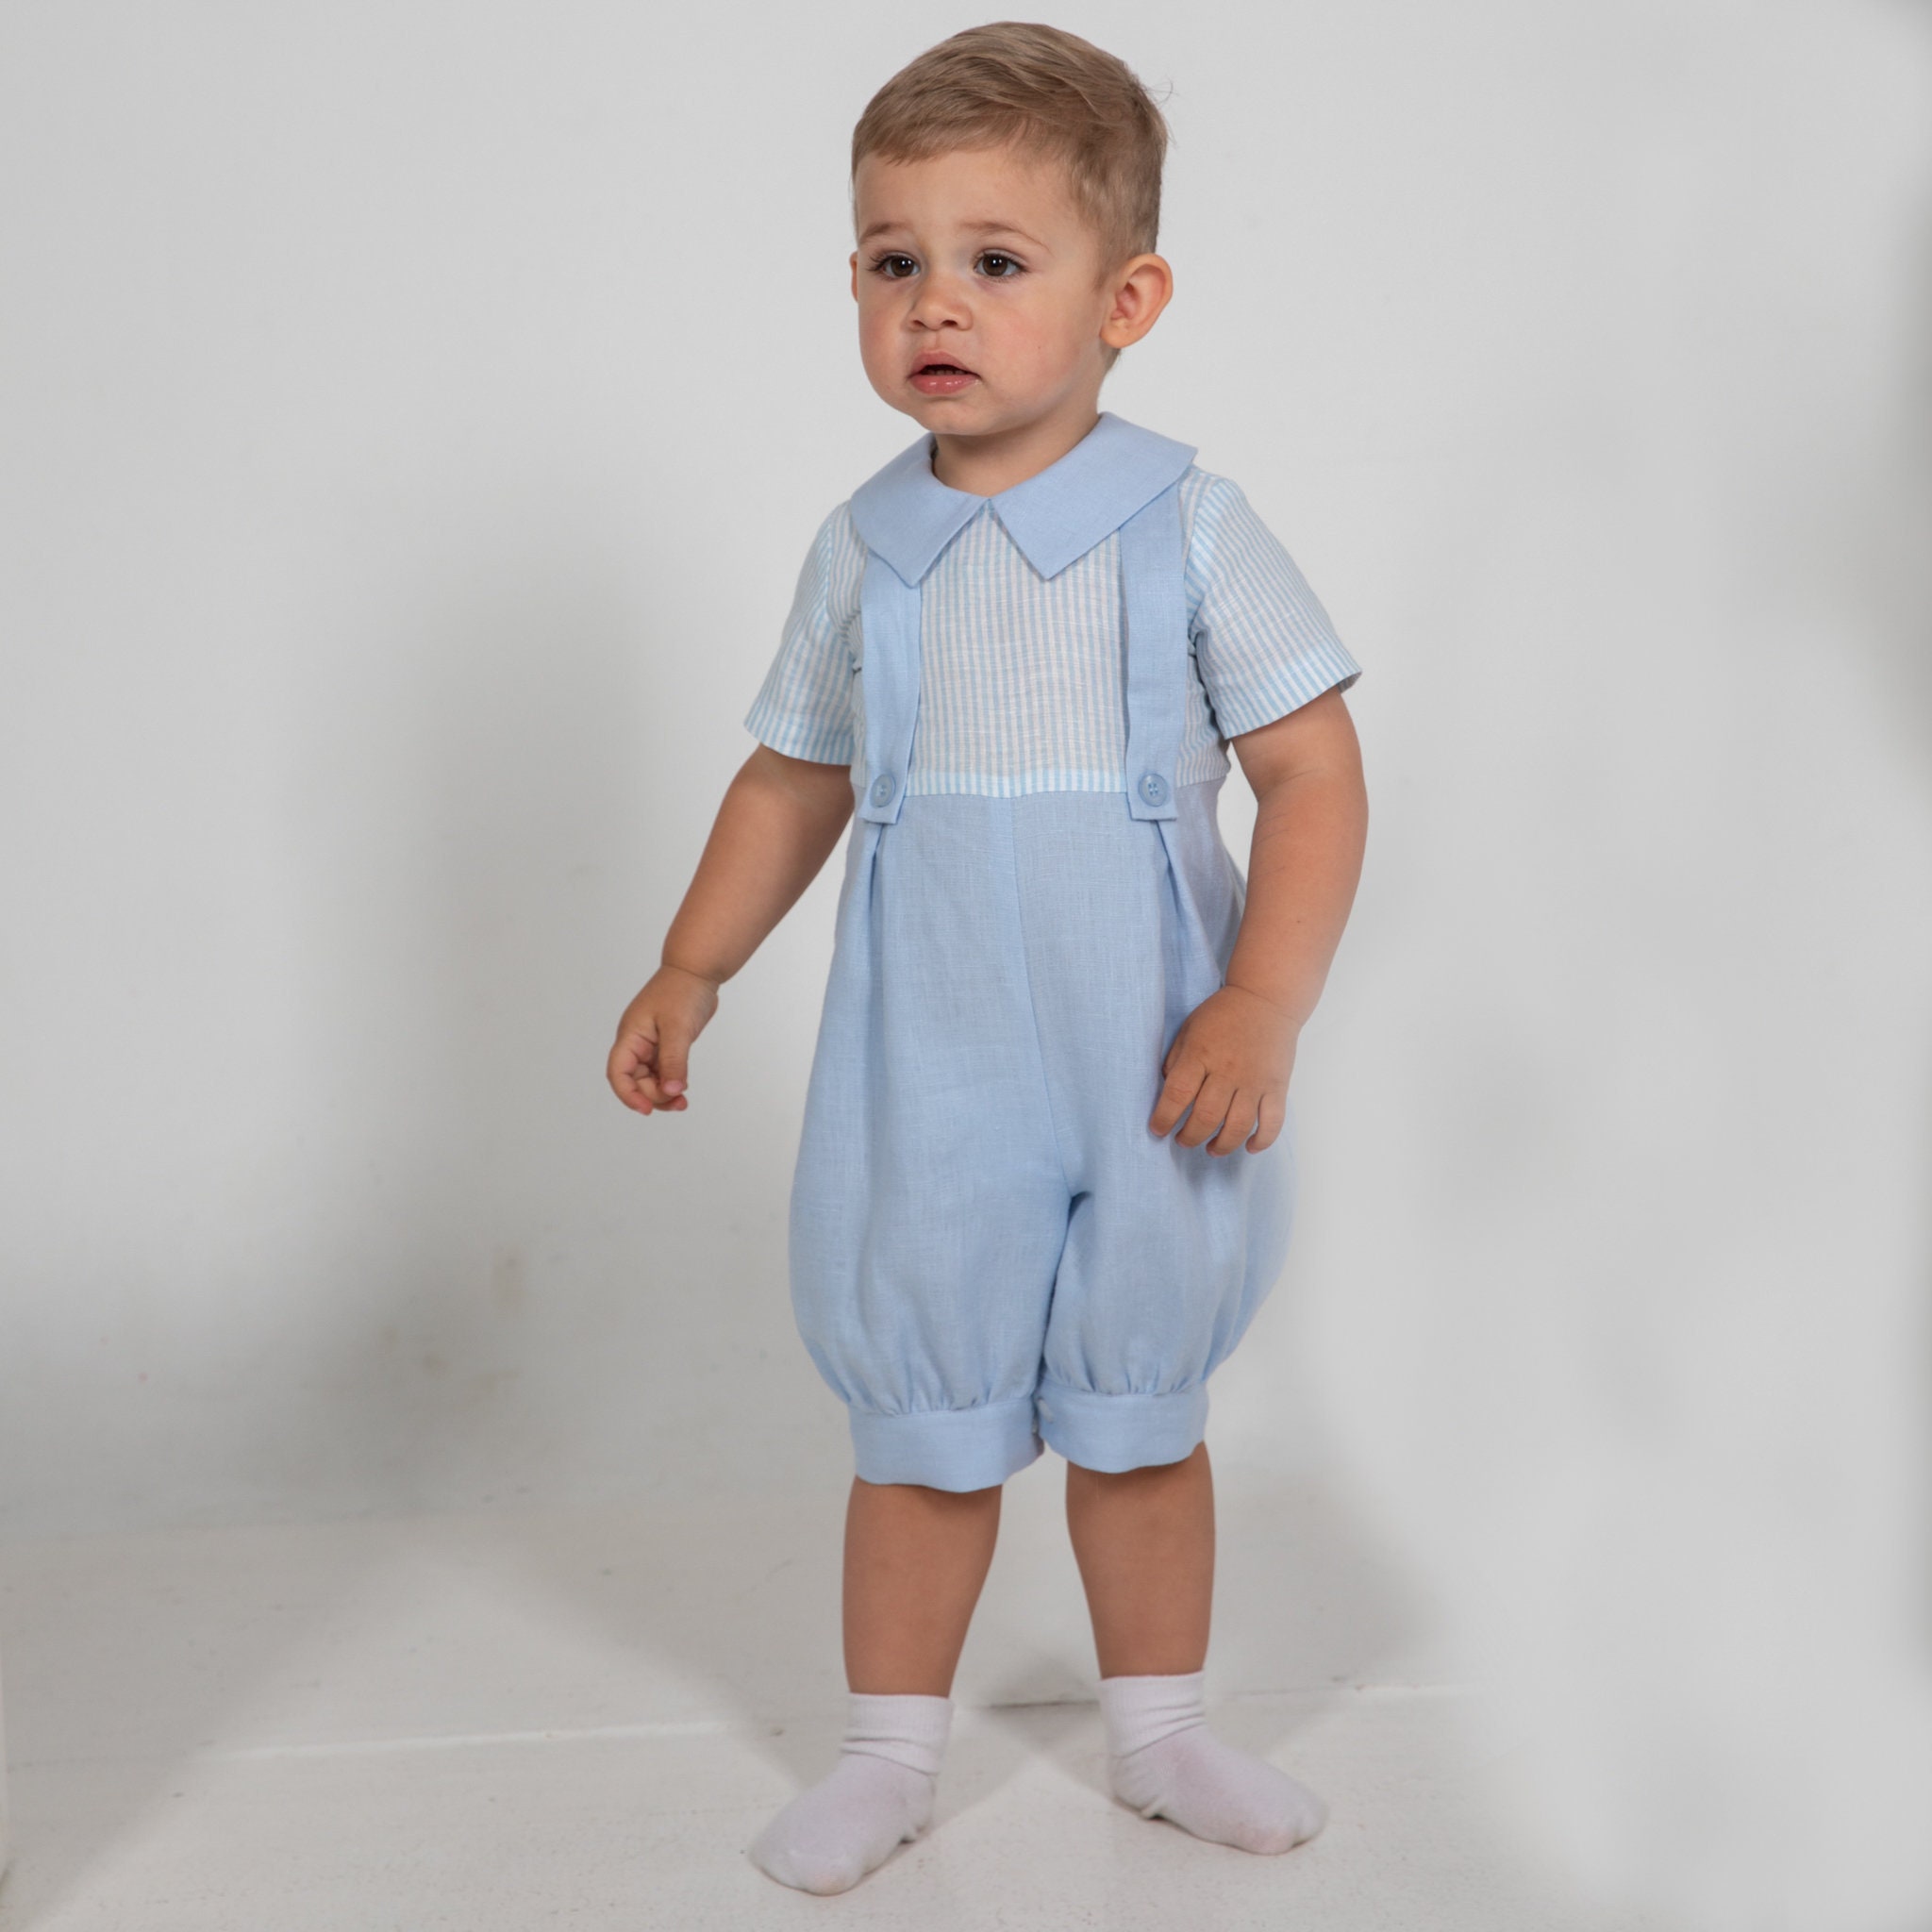 ToLady dungaree KIDS FASHION Baby Jumpsuits & Dungarees Print White/Blue 8Y discount 77% 